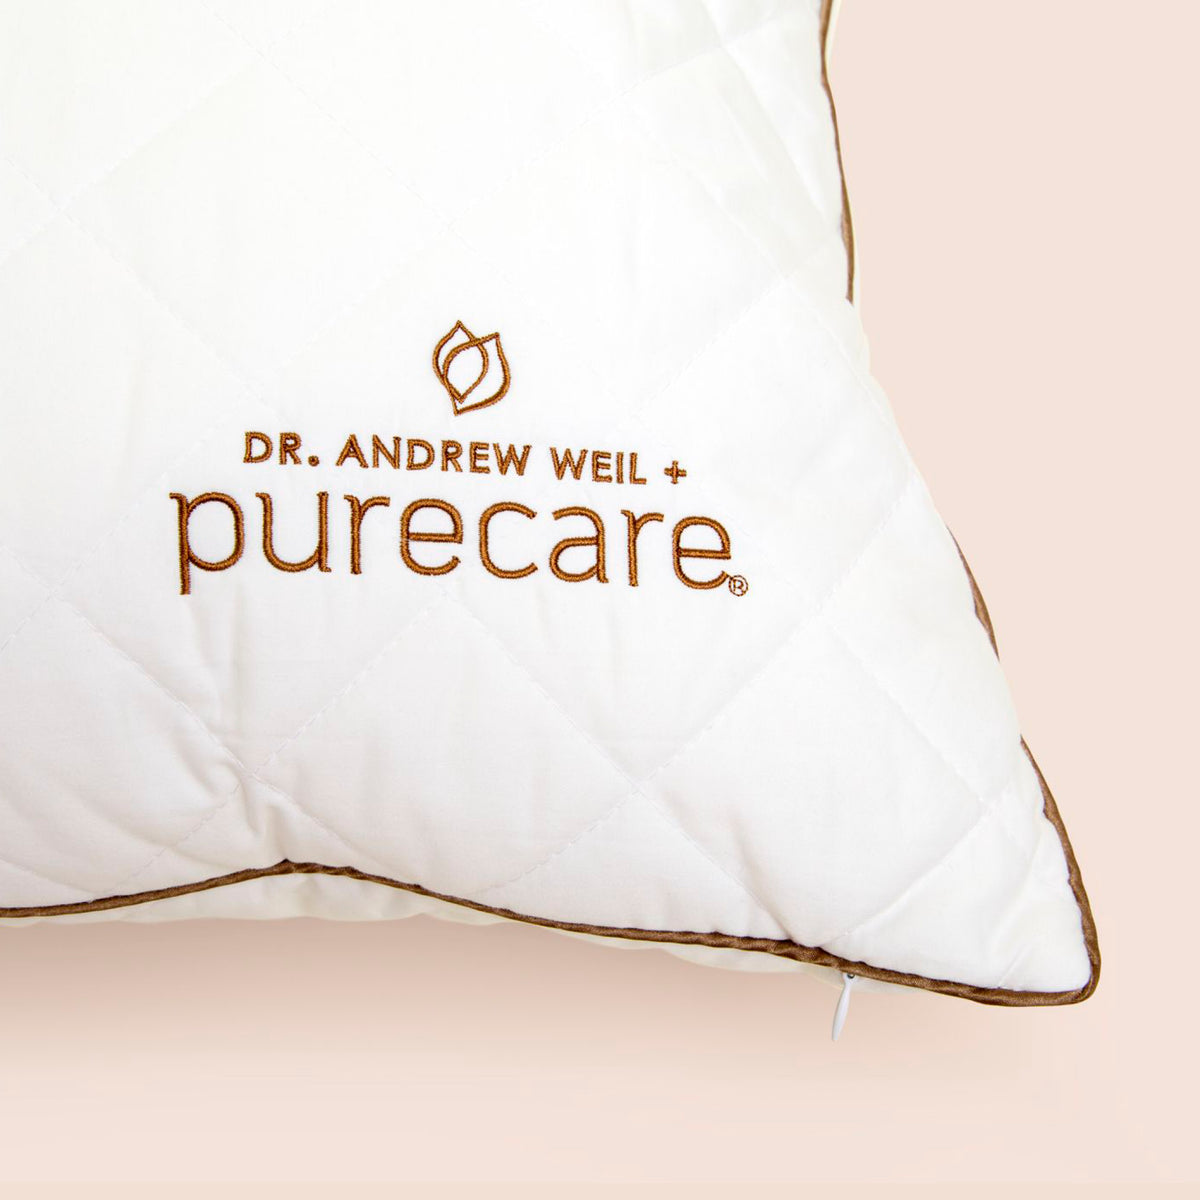 Close-up image of the Dr. Andrew Weil + Purecare logo on bottom right corner of All Seasons Wool Pillow